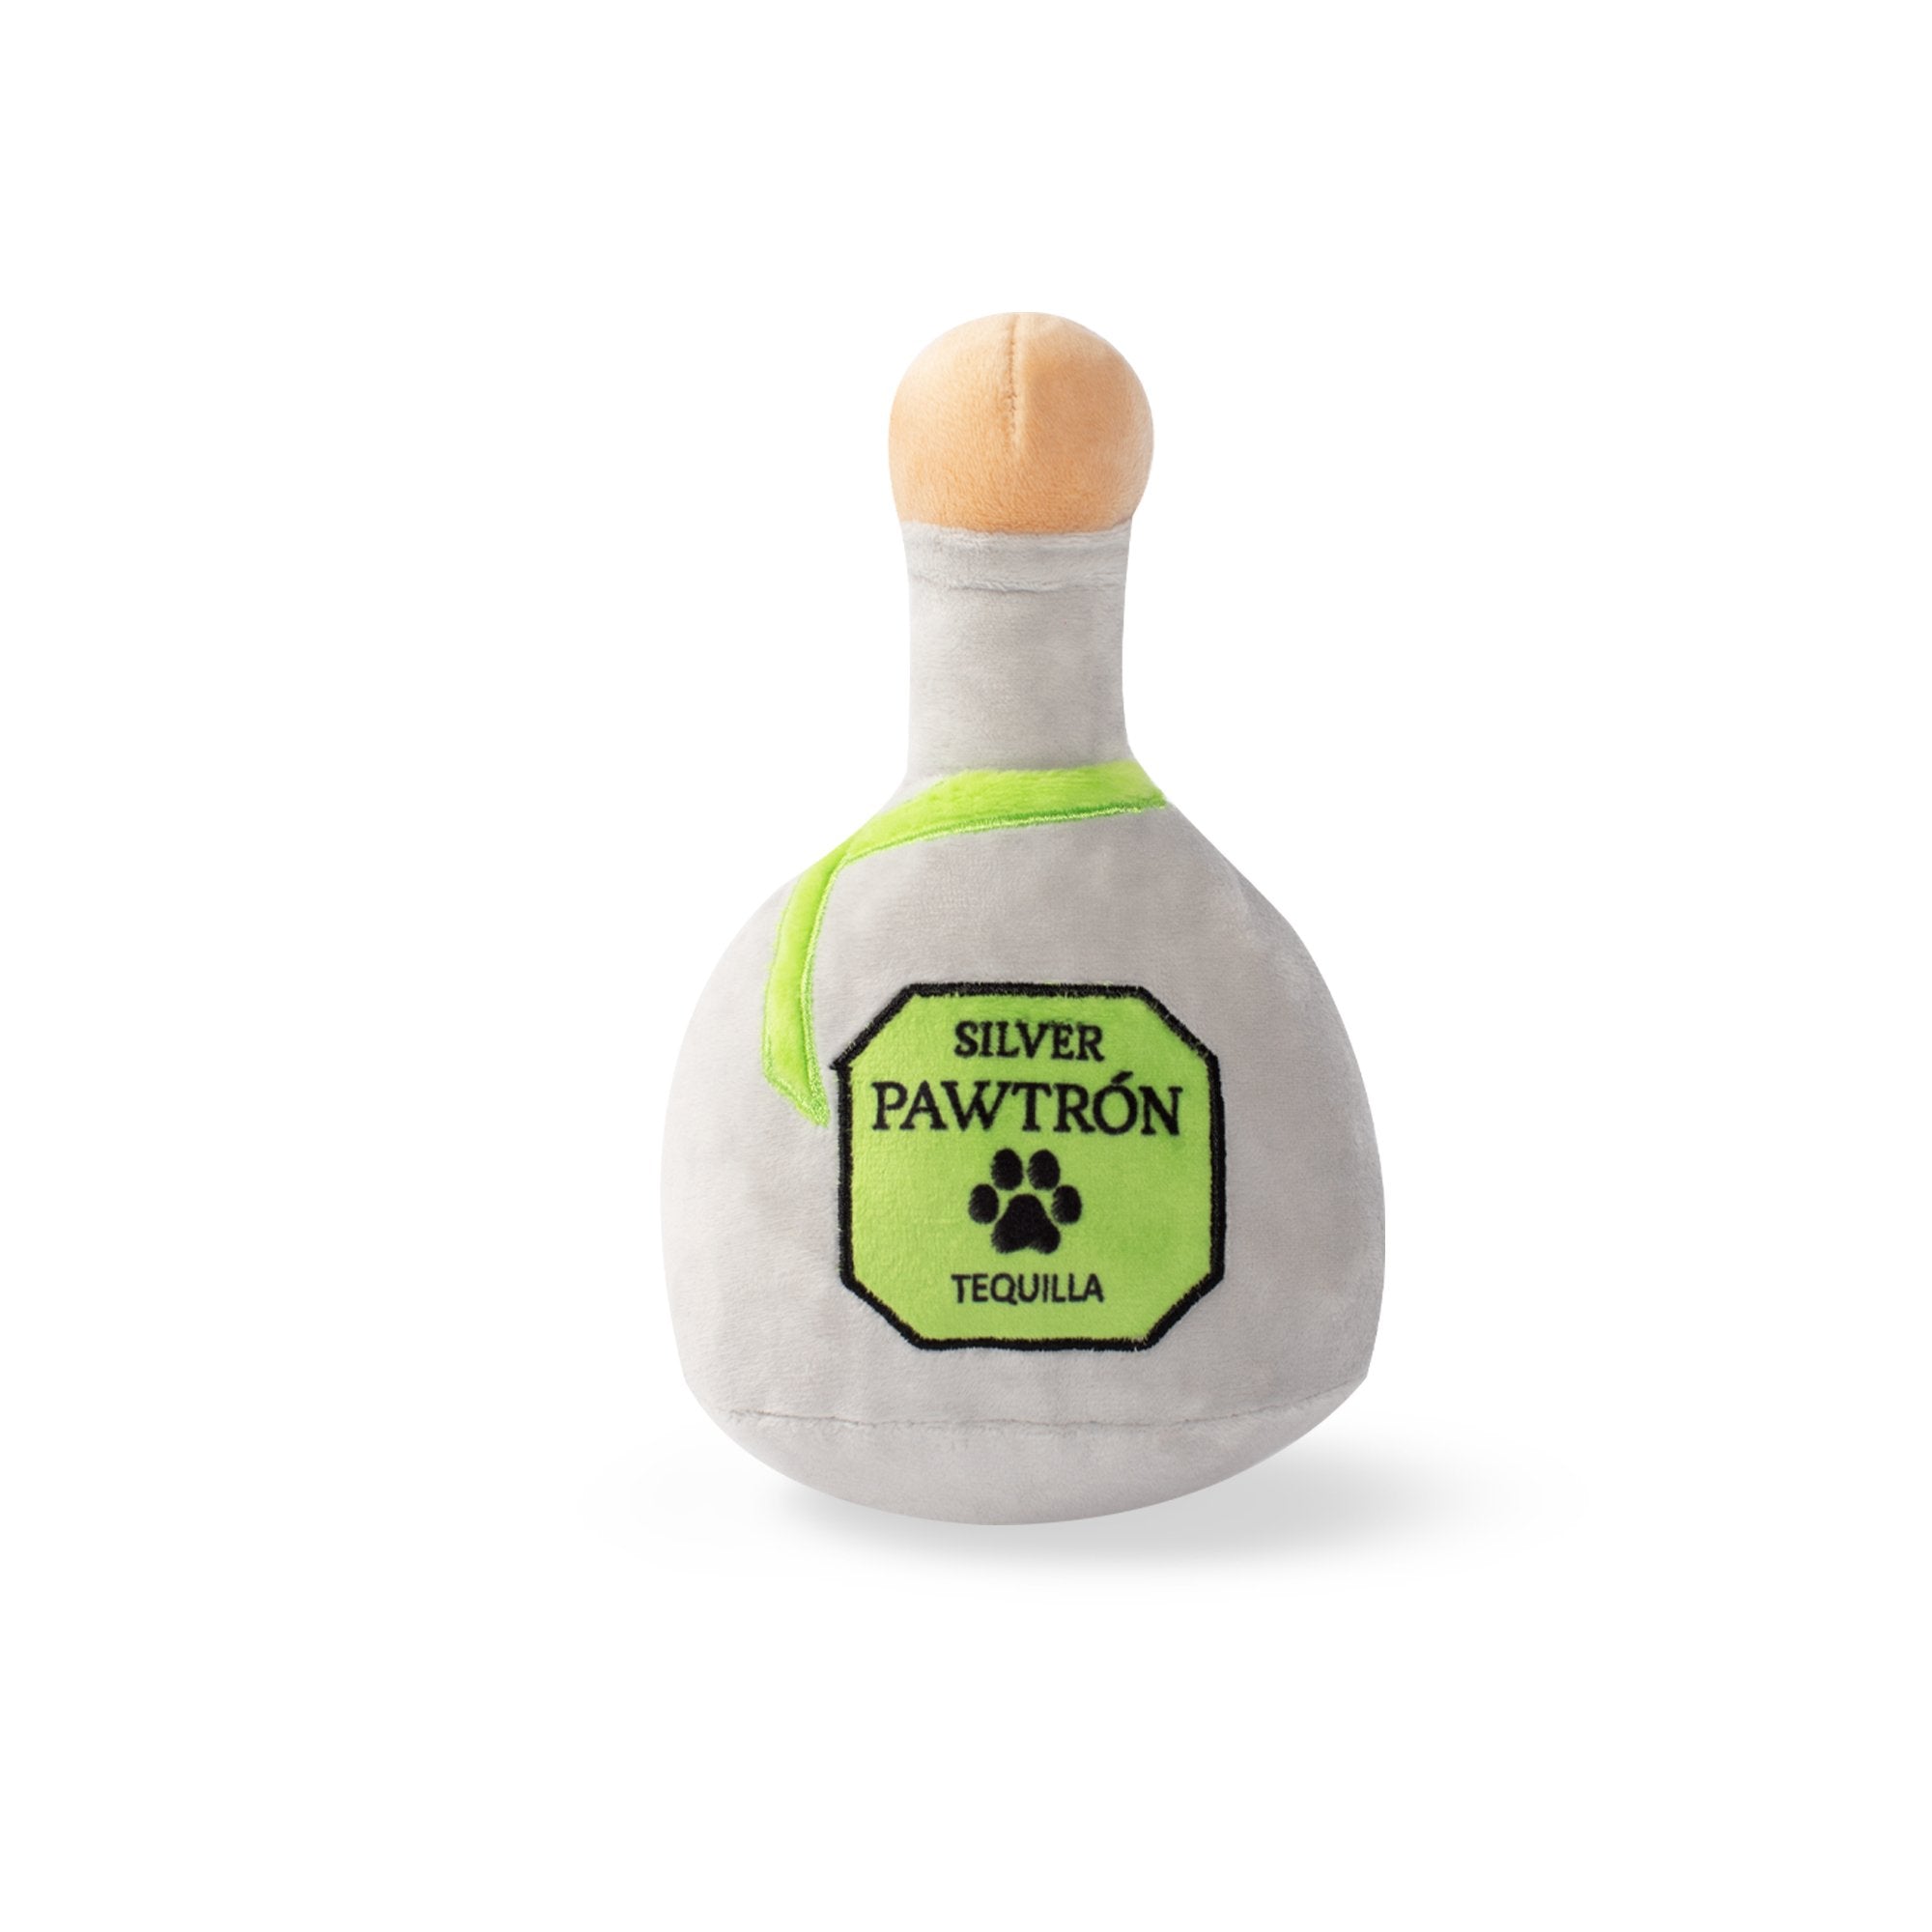 Pawtron Tequila Dog Toy